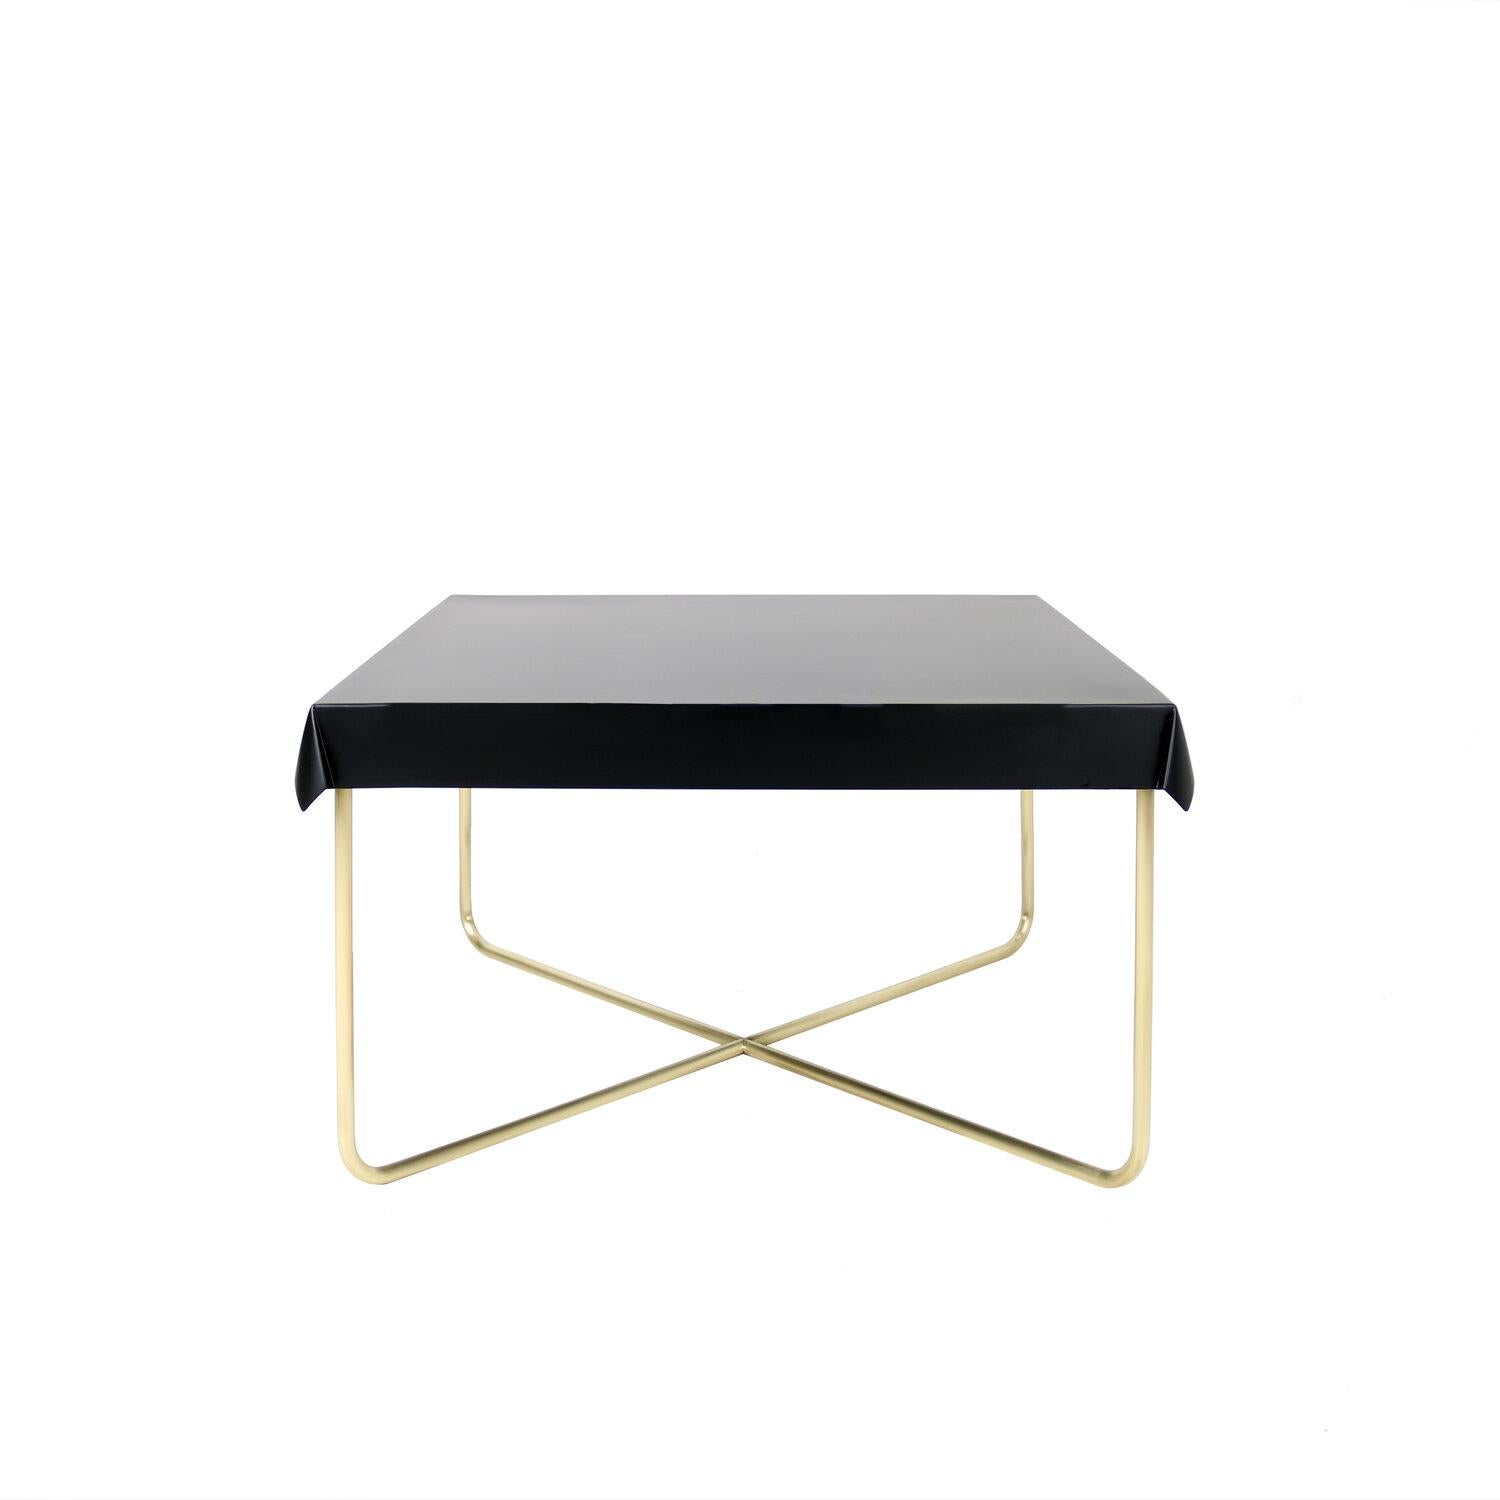 North American Metal Coffee Table with Formed Black Drape Top and Brass Base by Debra Folz For Sale